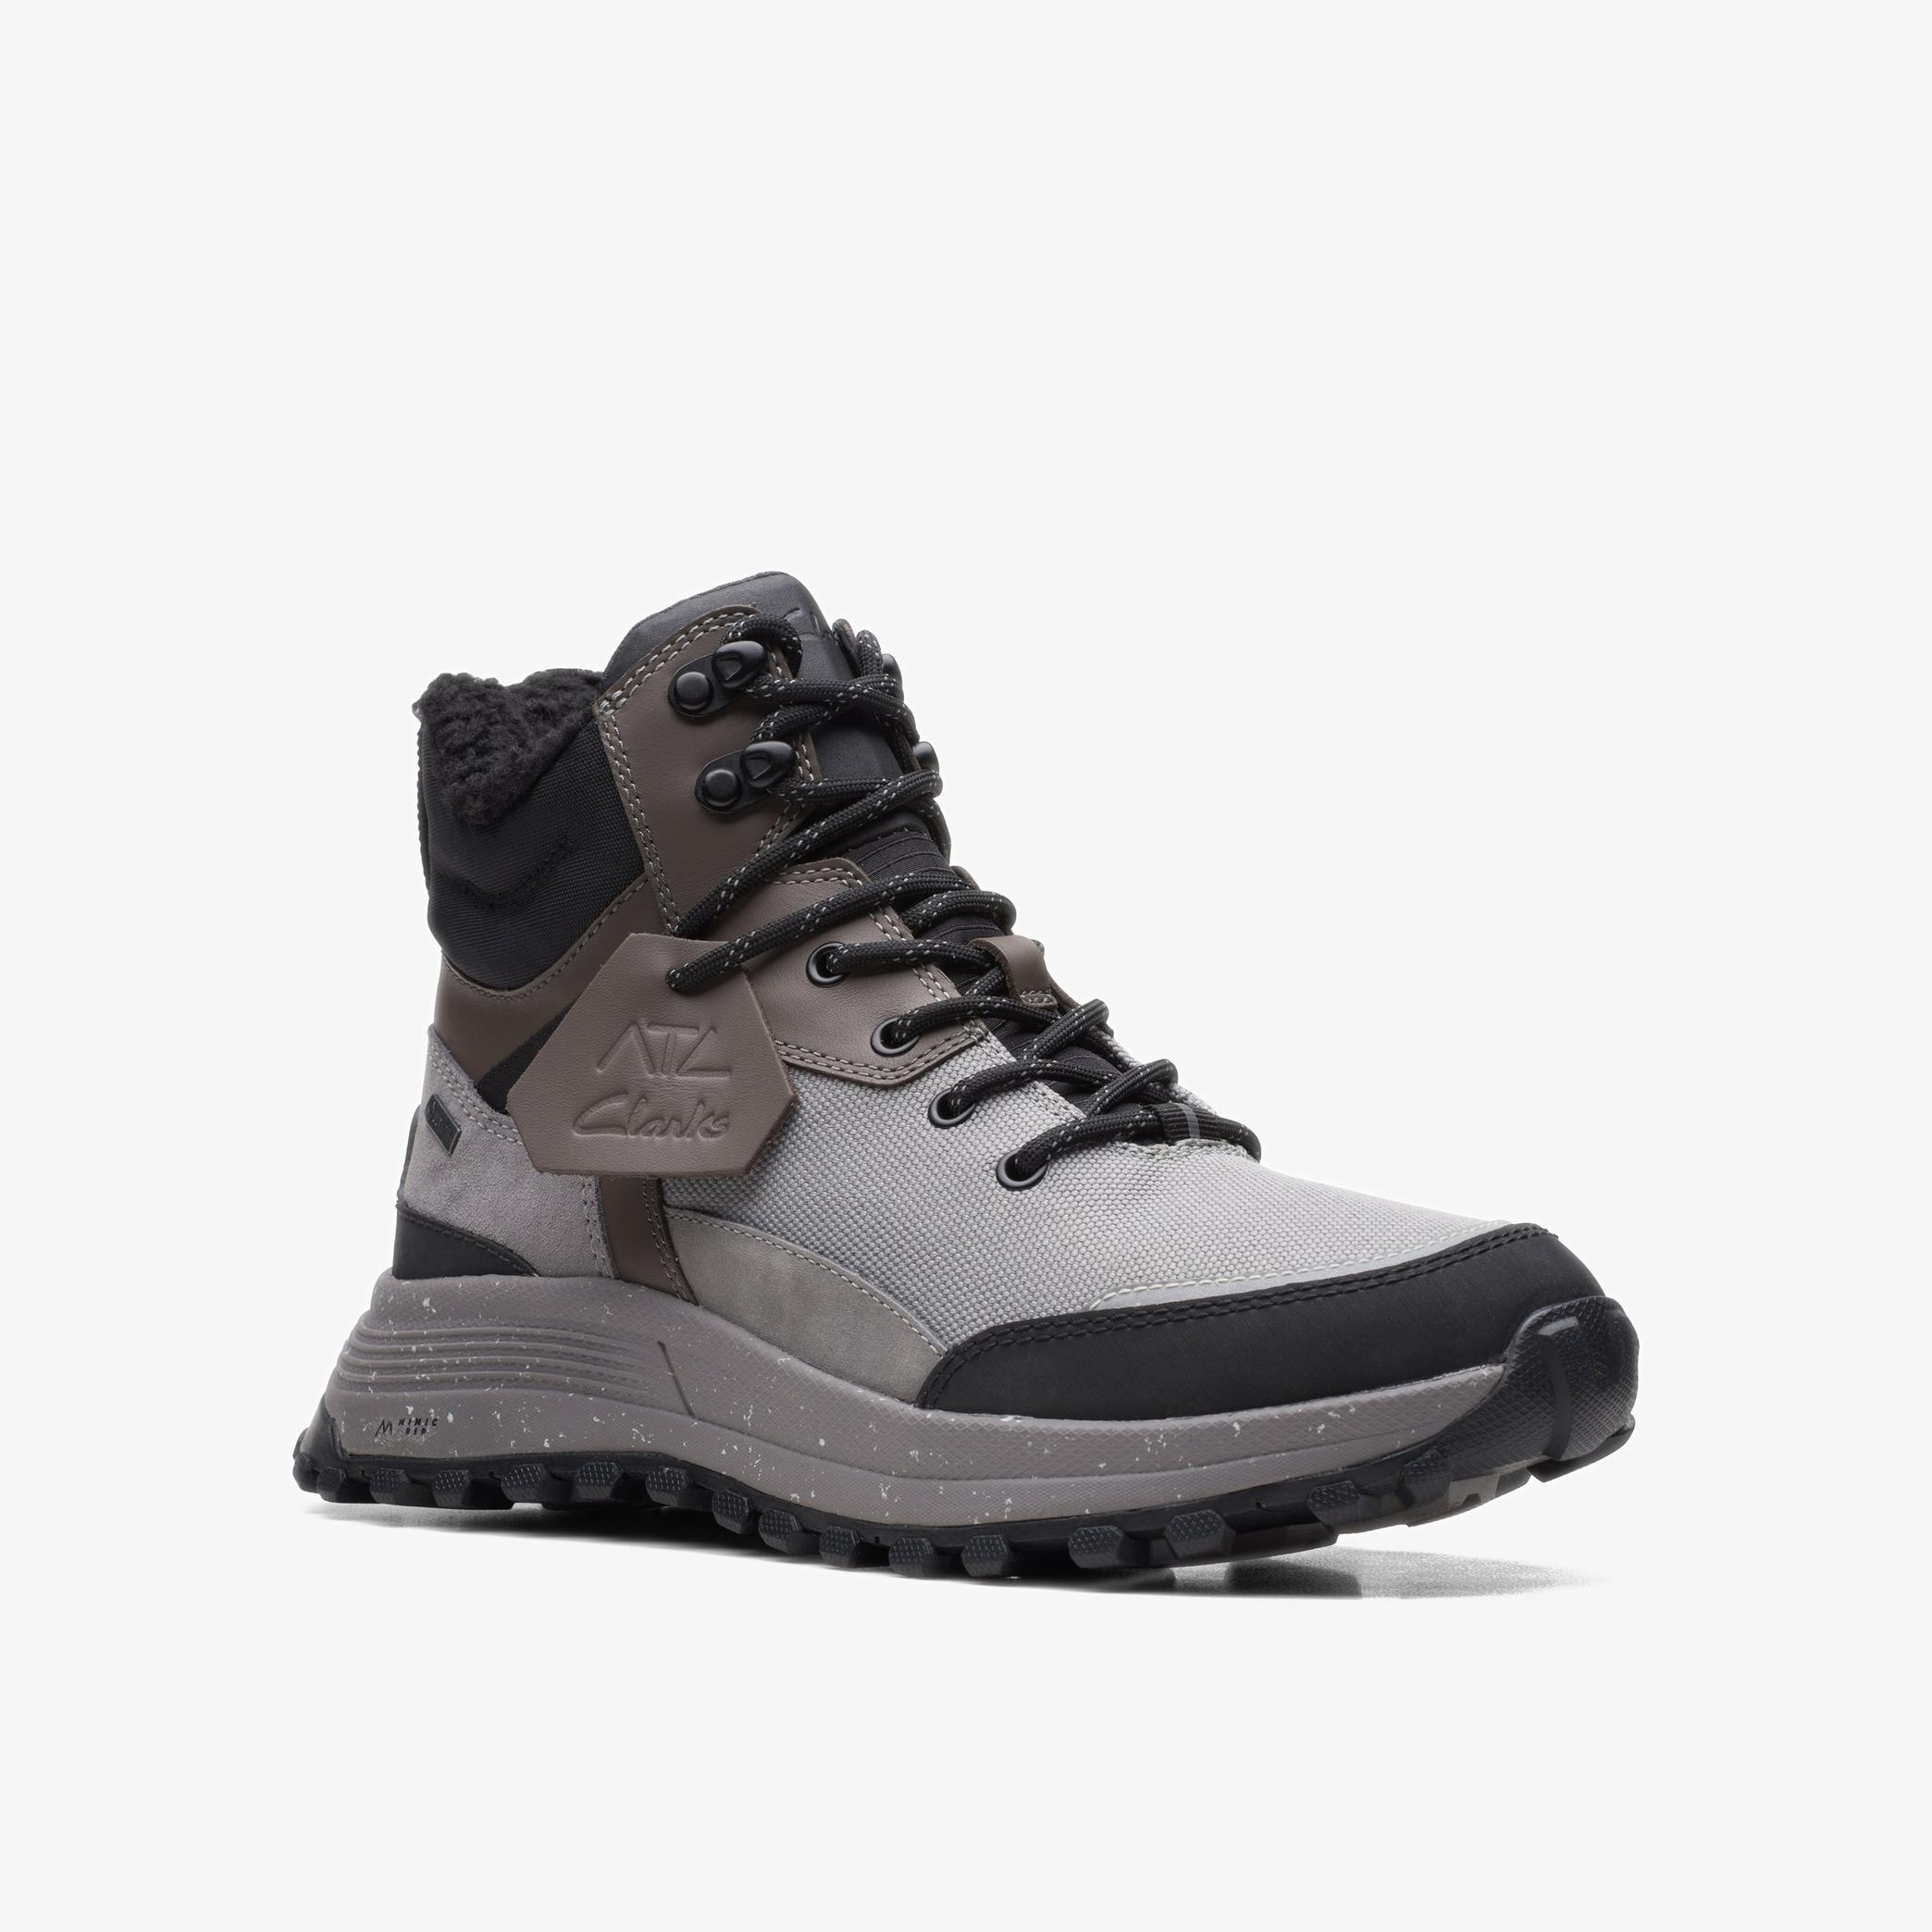 ATL Trek Sky GORE-TEX Grey Warmlined Leather Ankle Boots, view 3 of 6